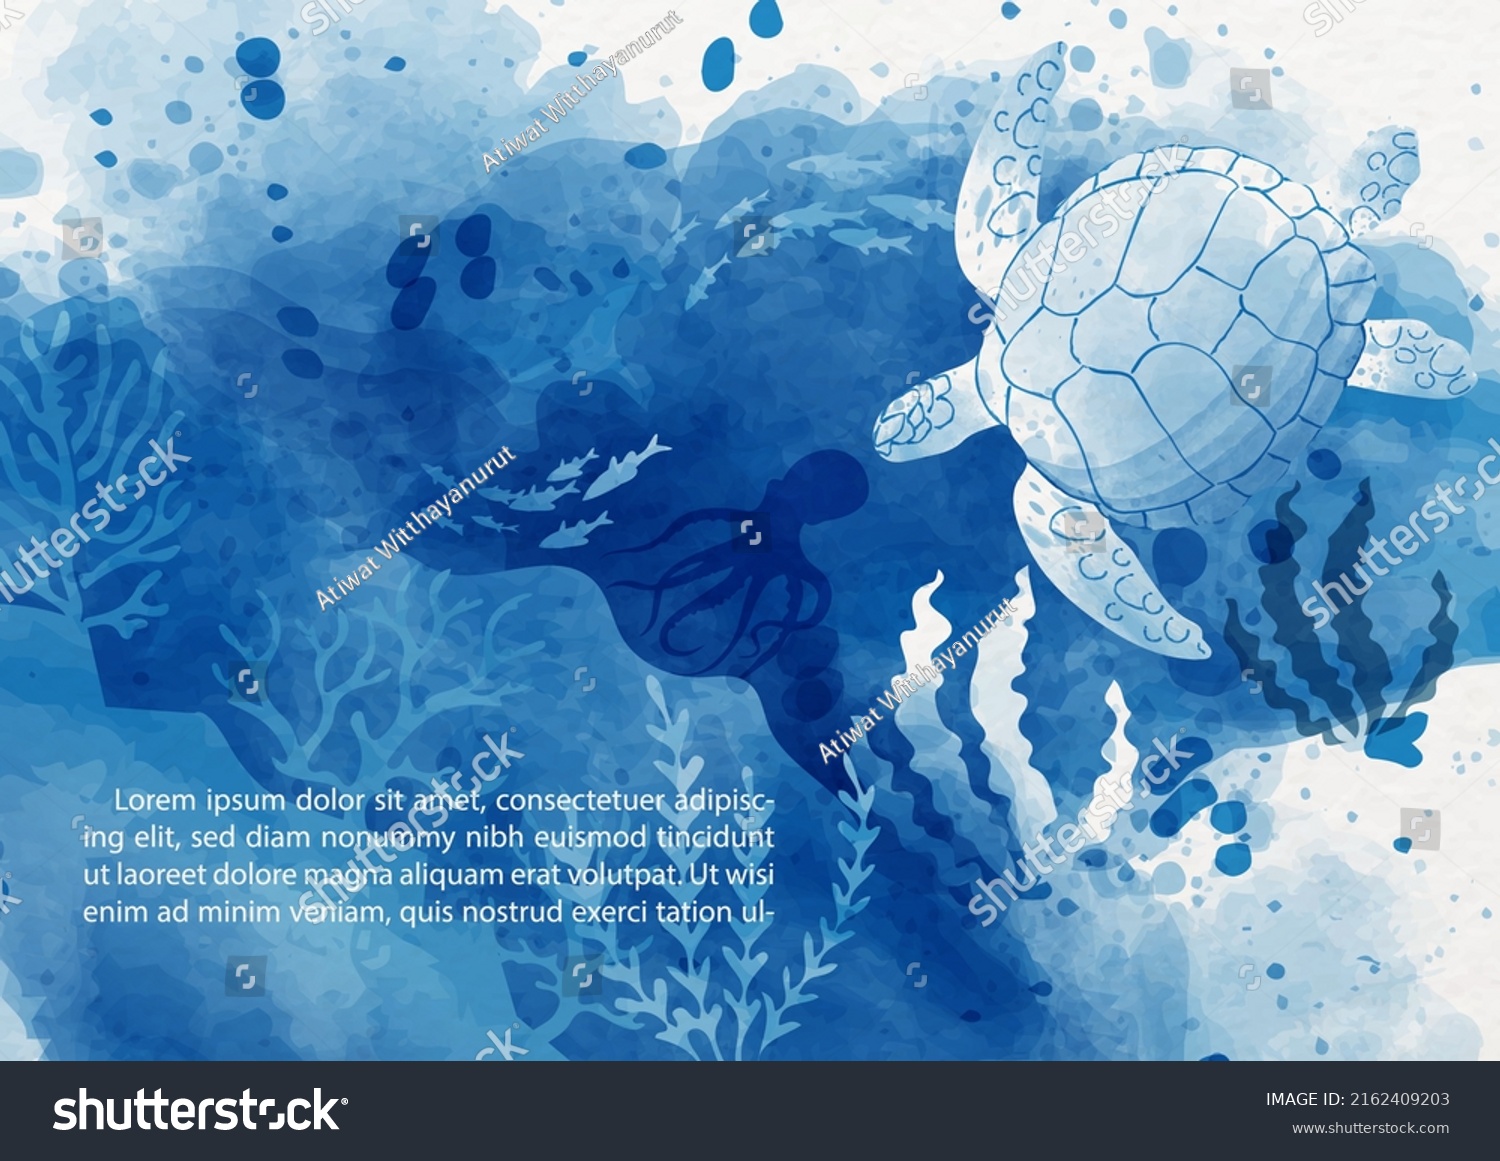 Sea turtle with the scene of under ocean in watercolor style, example texts on white paper pattern background. Card and poster of ocean in blue watercolor style and vector design. #2162409203